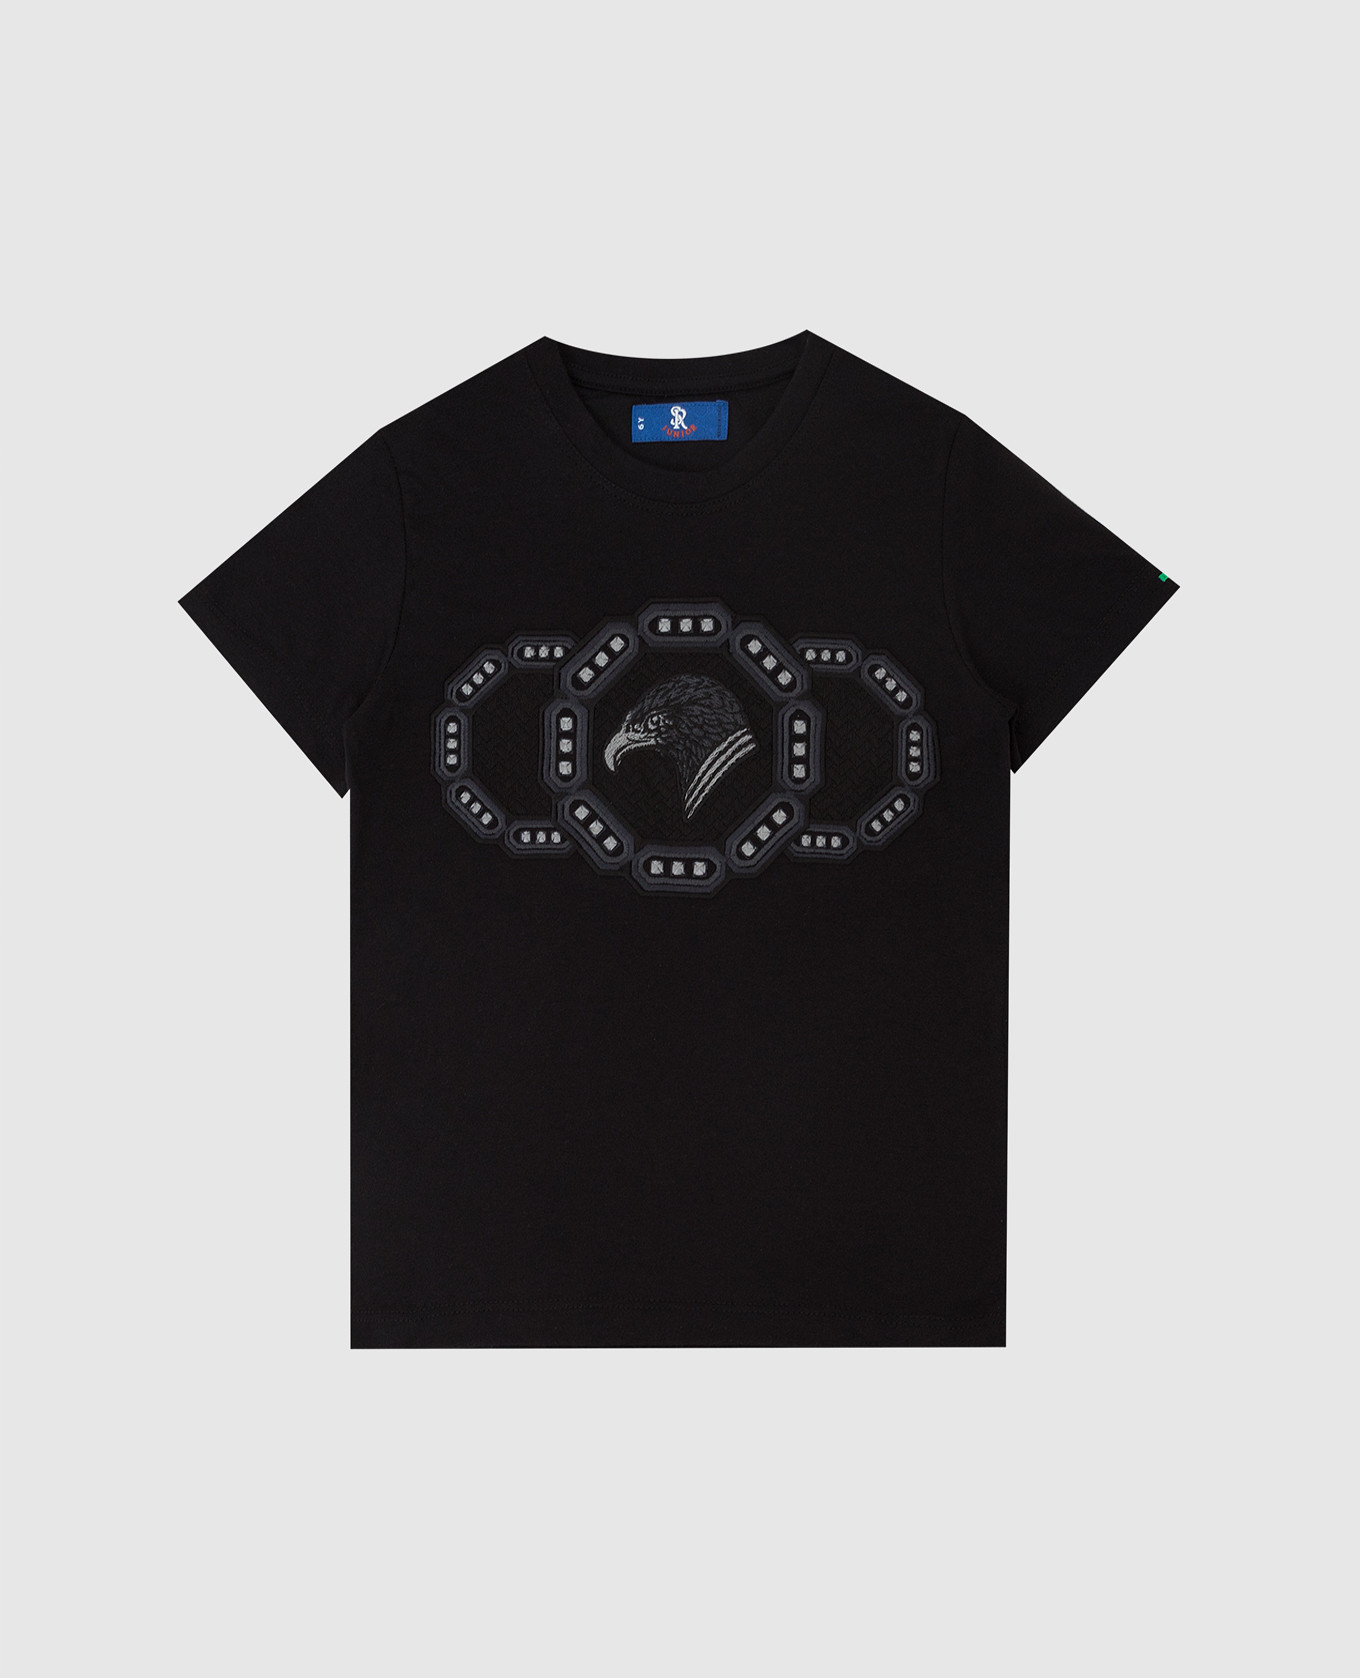 Children's black t-shirt with logo embroidery